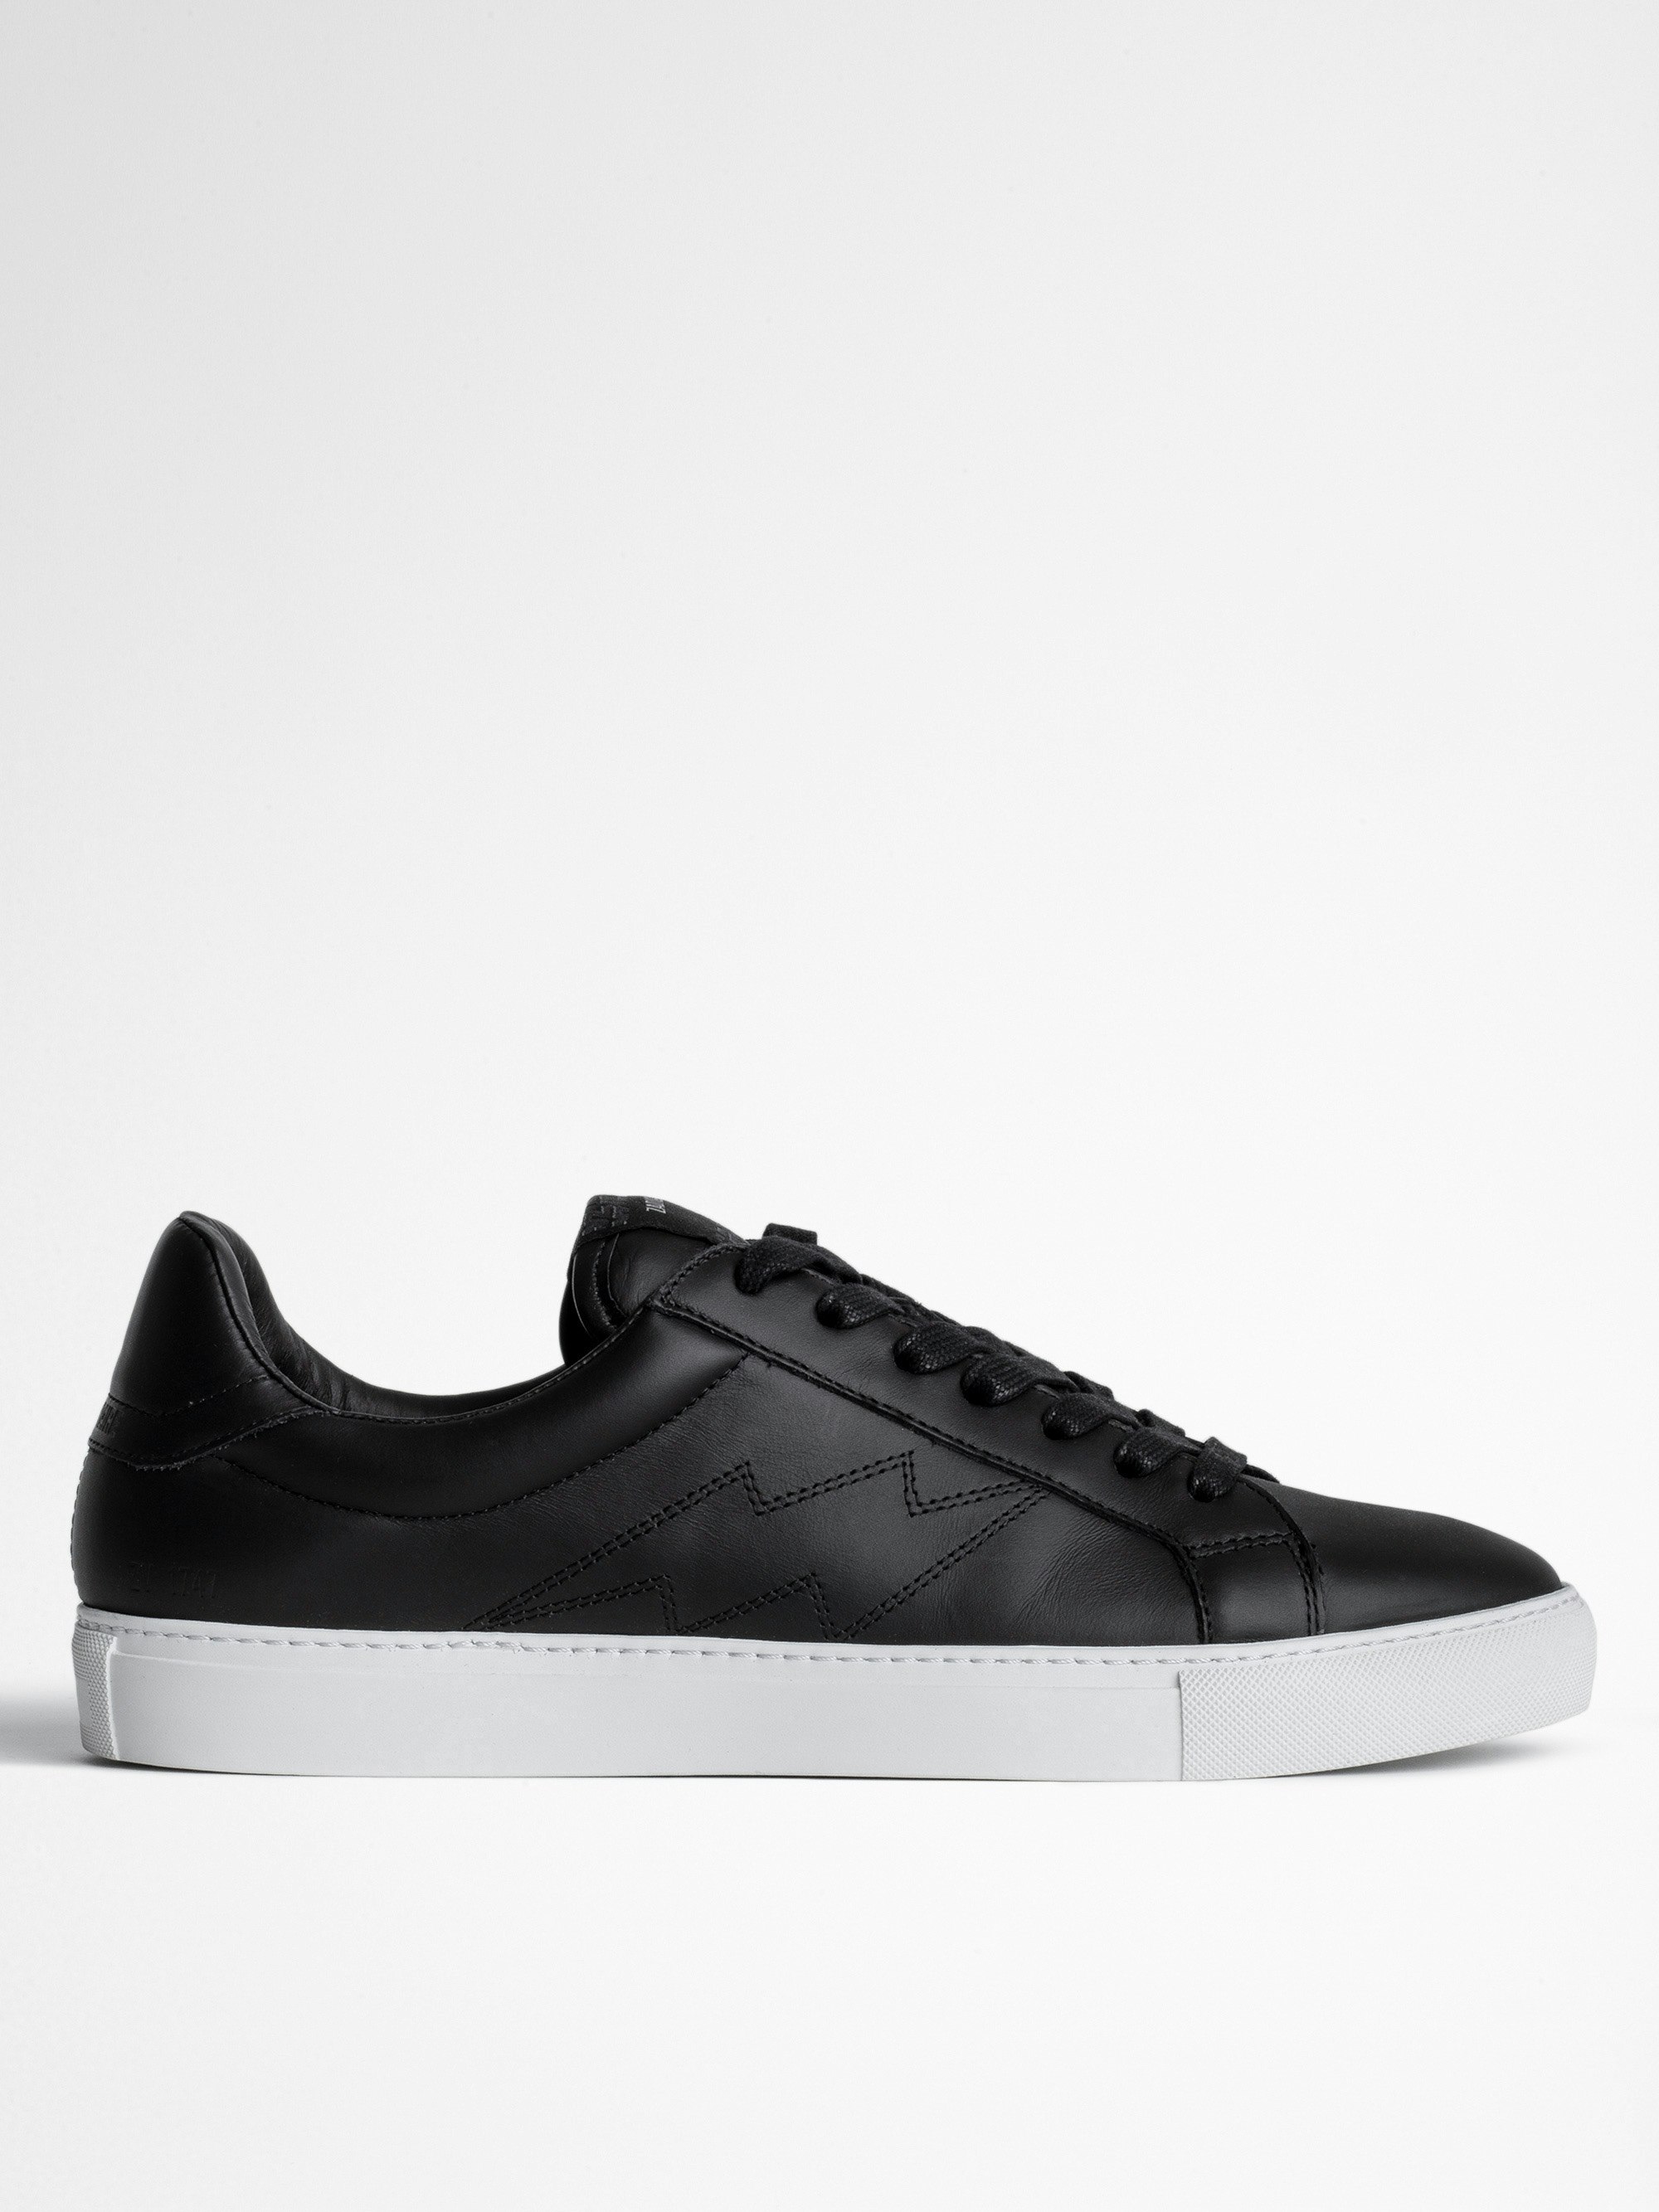 ZV1747 Flash Trainers - Men’s black leather sneakers with lightning bolt topstitching.